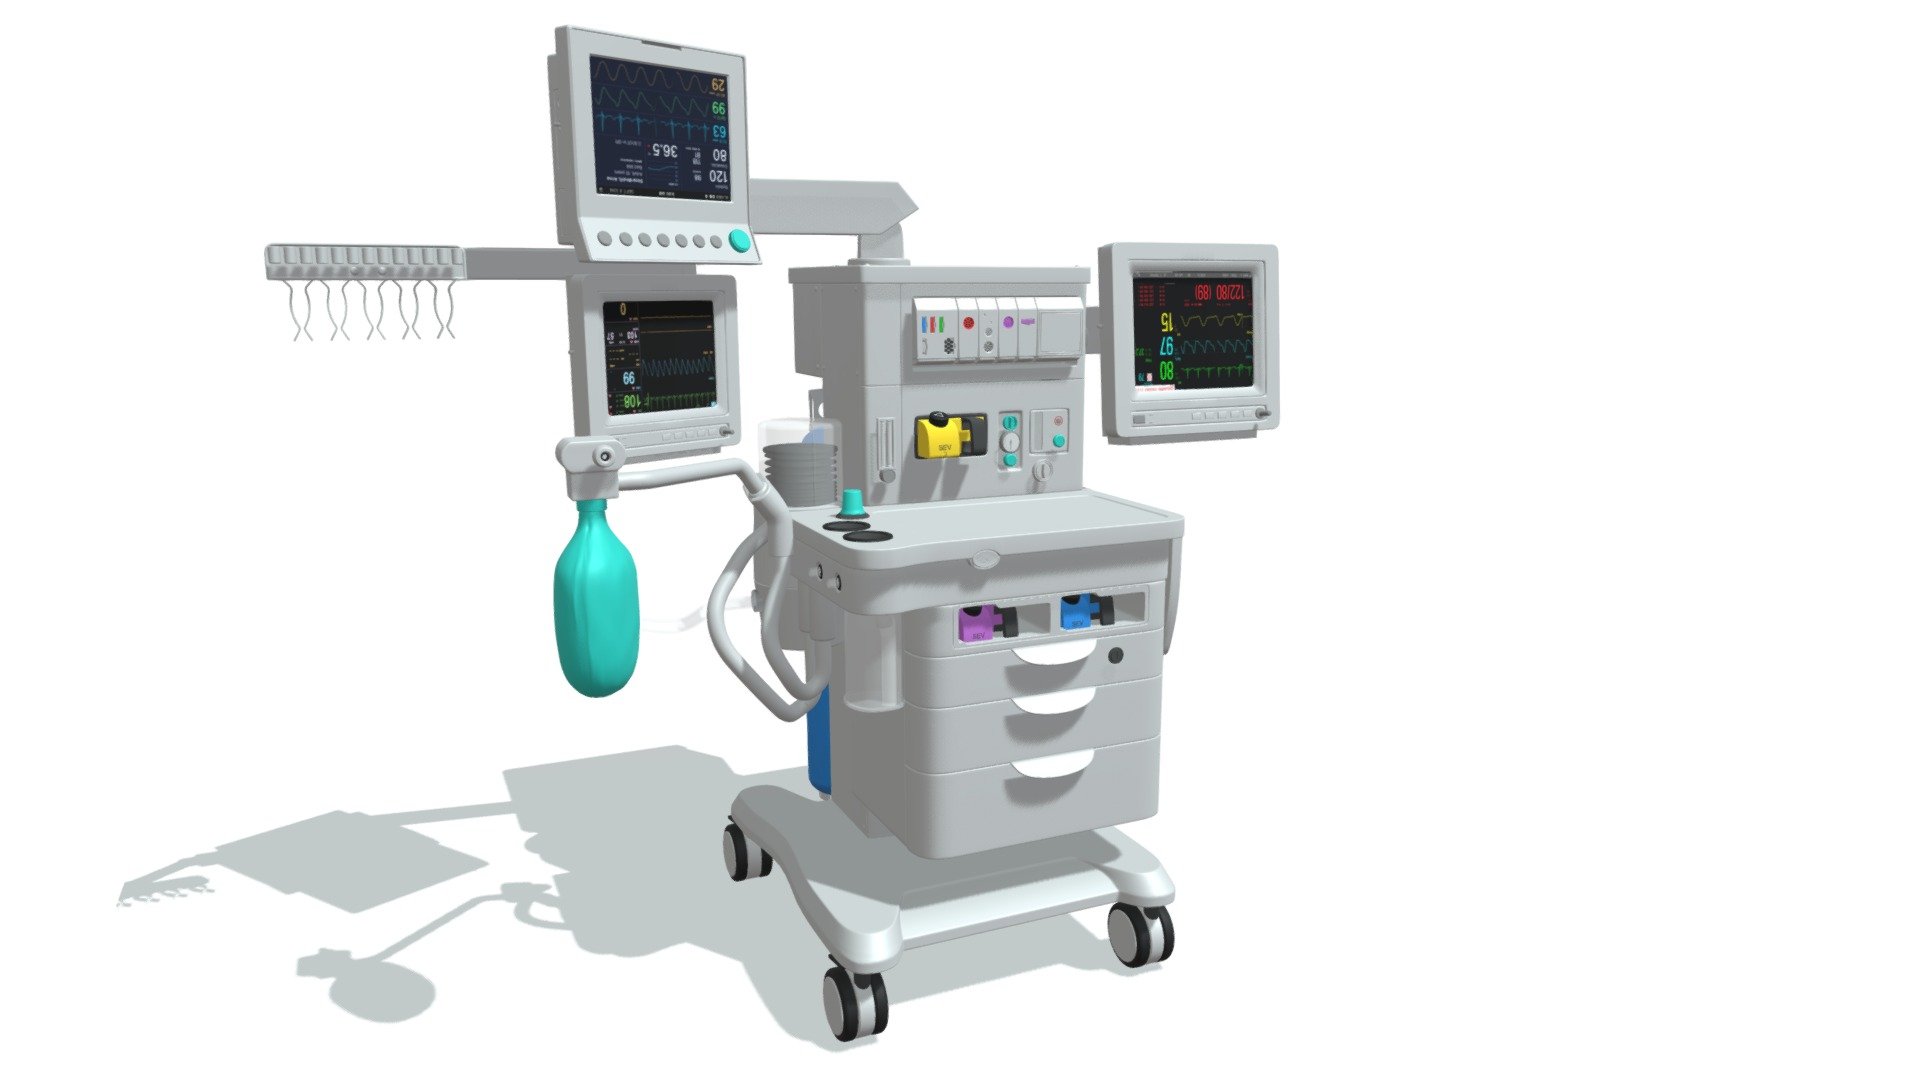 High quality 3d model of anesthesia respiratory workstation trolley, advance breathing system for operating rooms 3d model